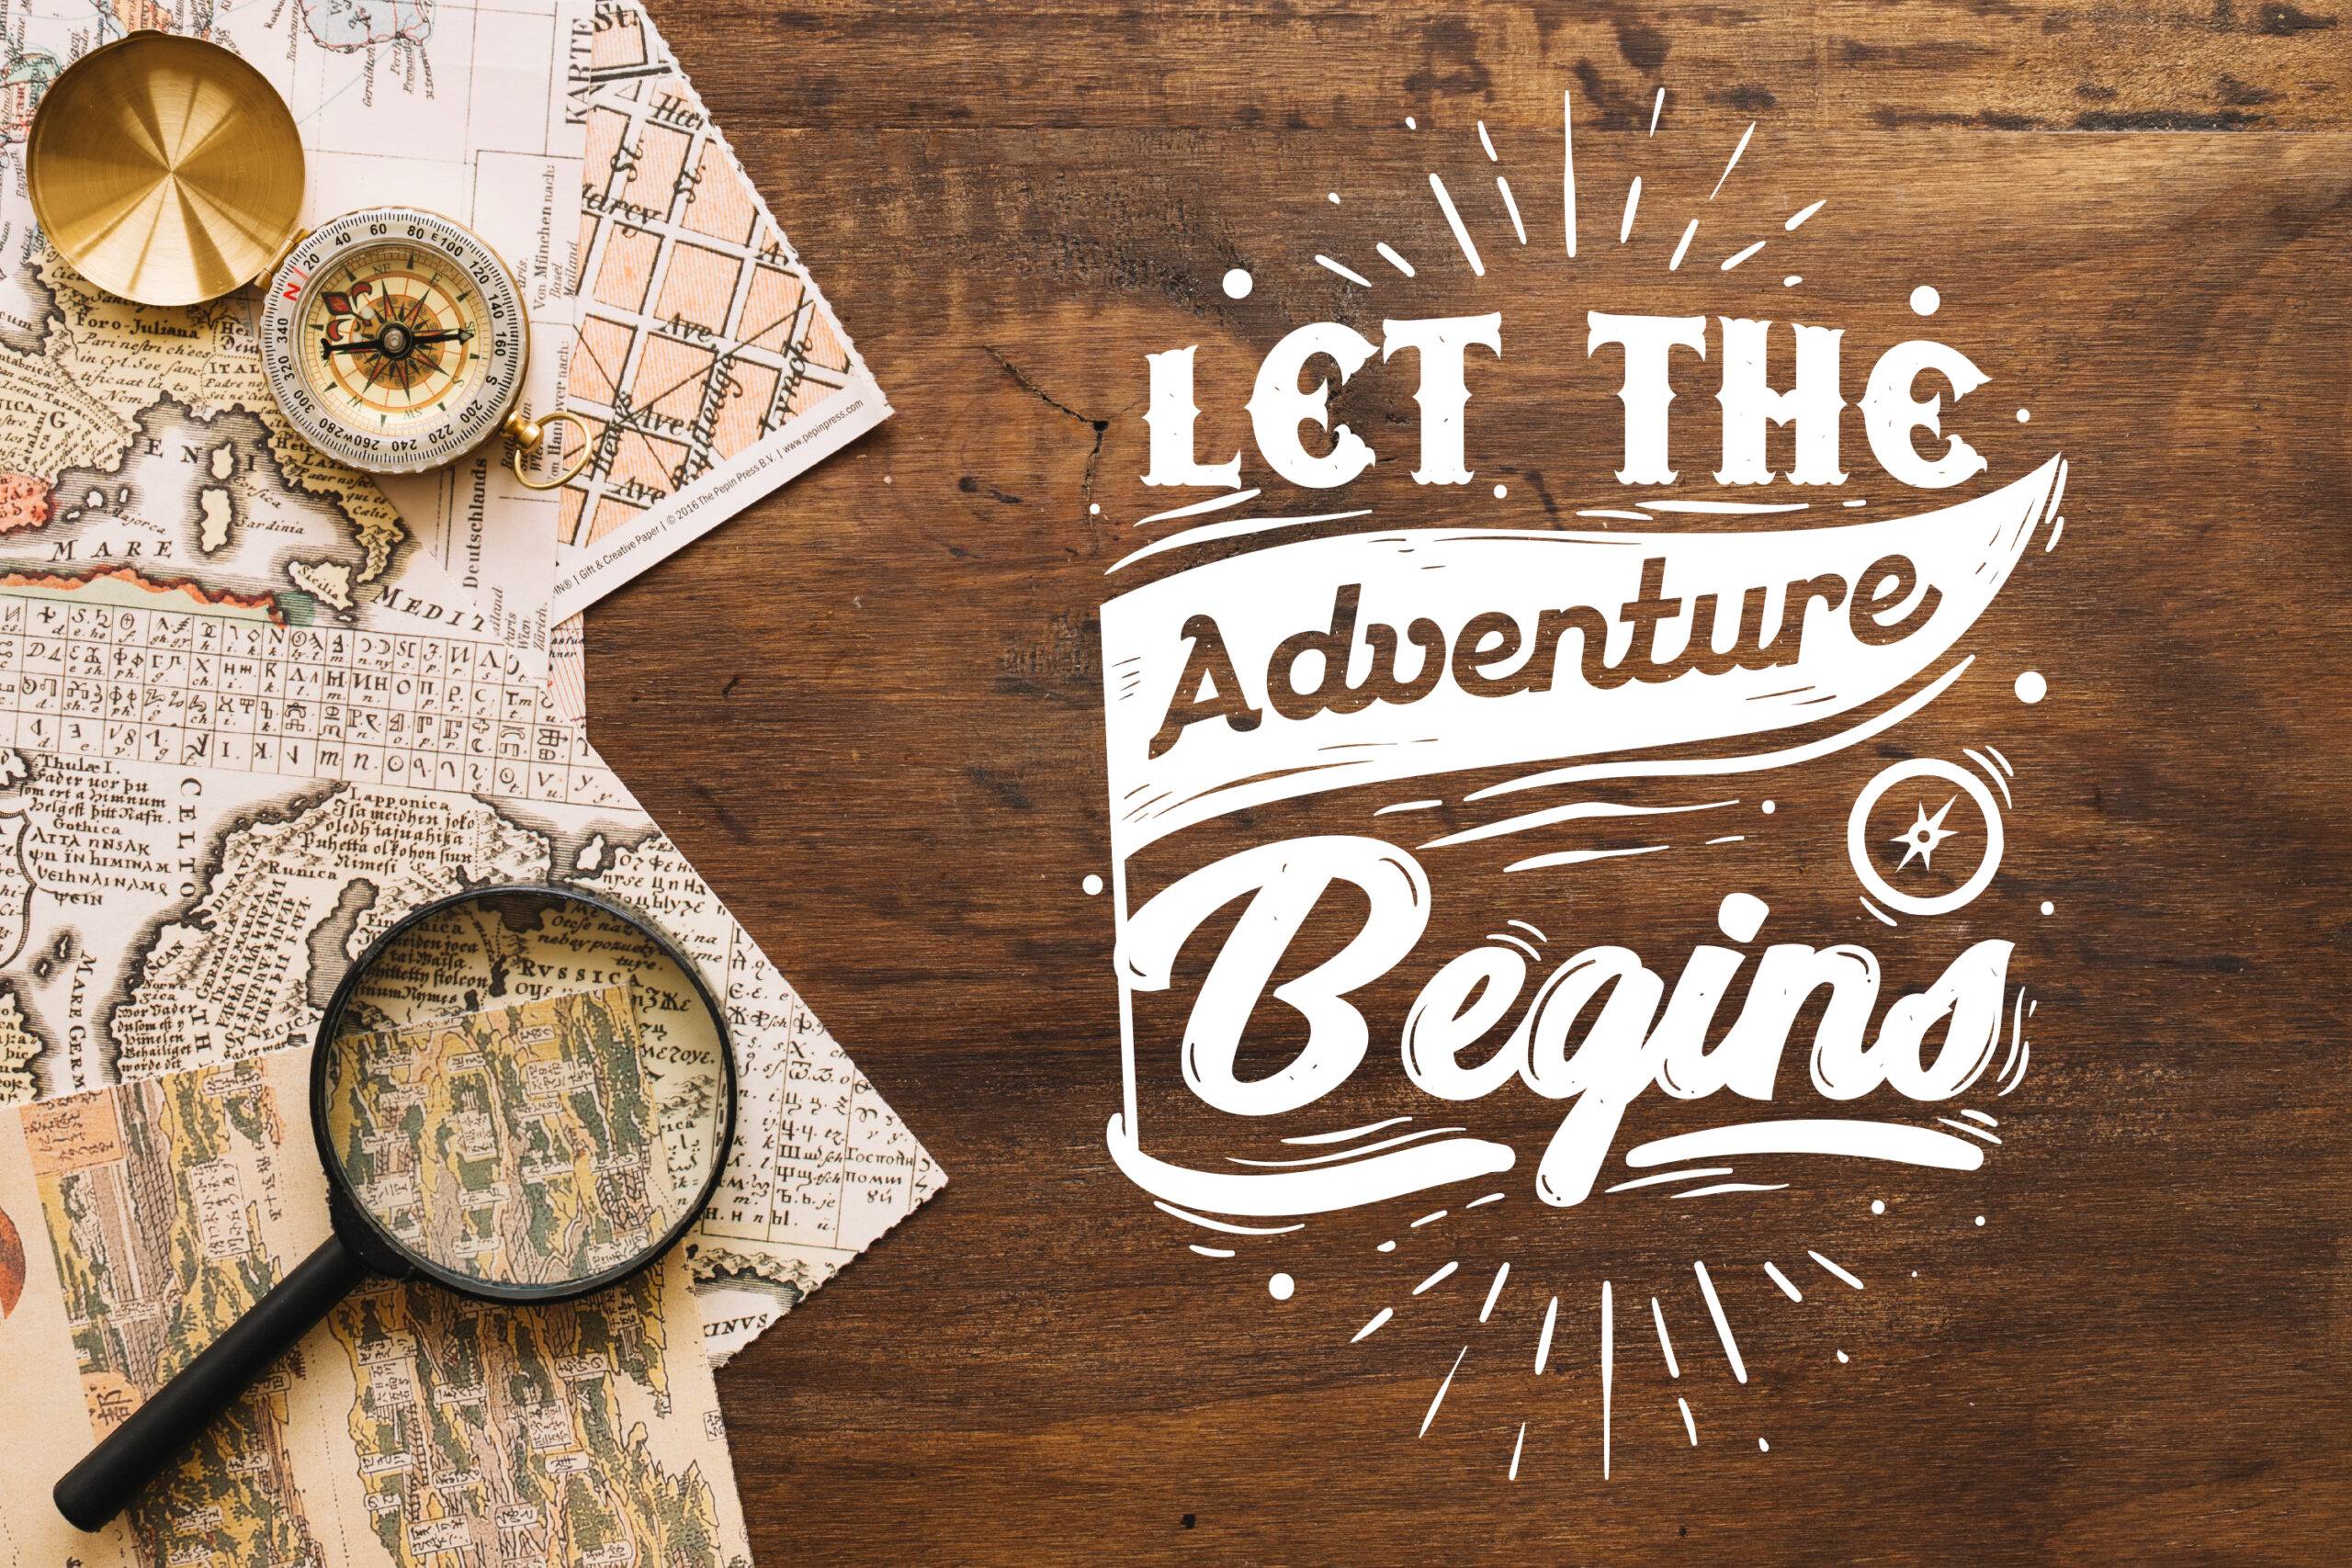 Vintage maps, compass, and magnifying glass on a desk with "Let The Adventure Begins" text.